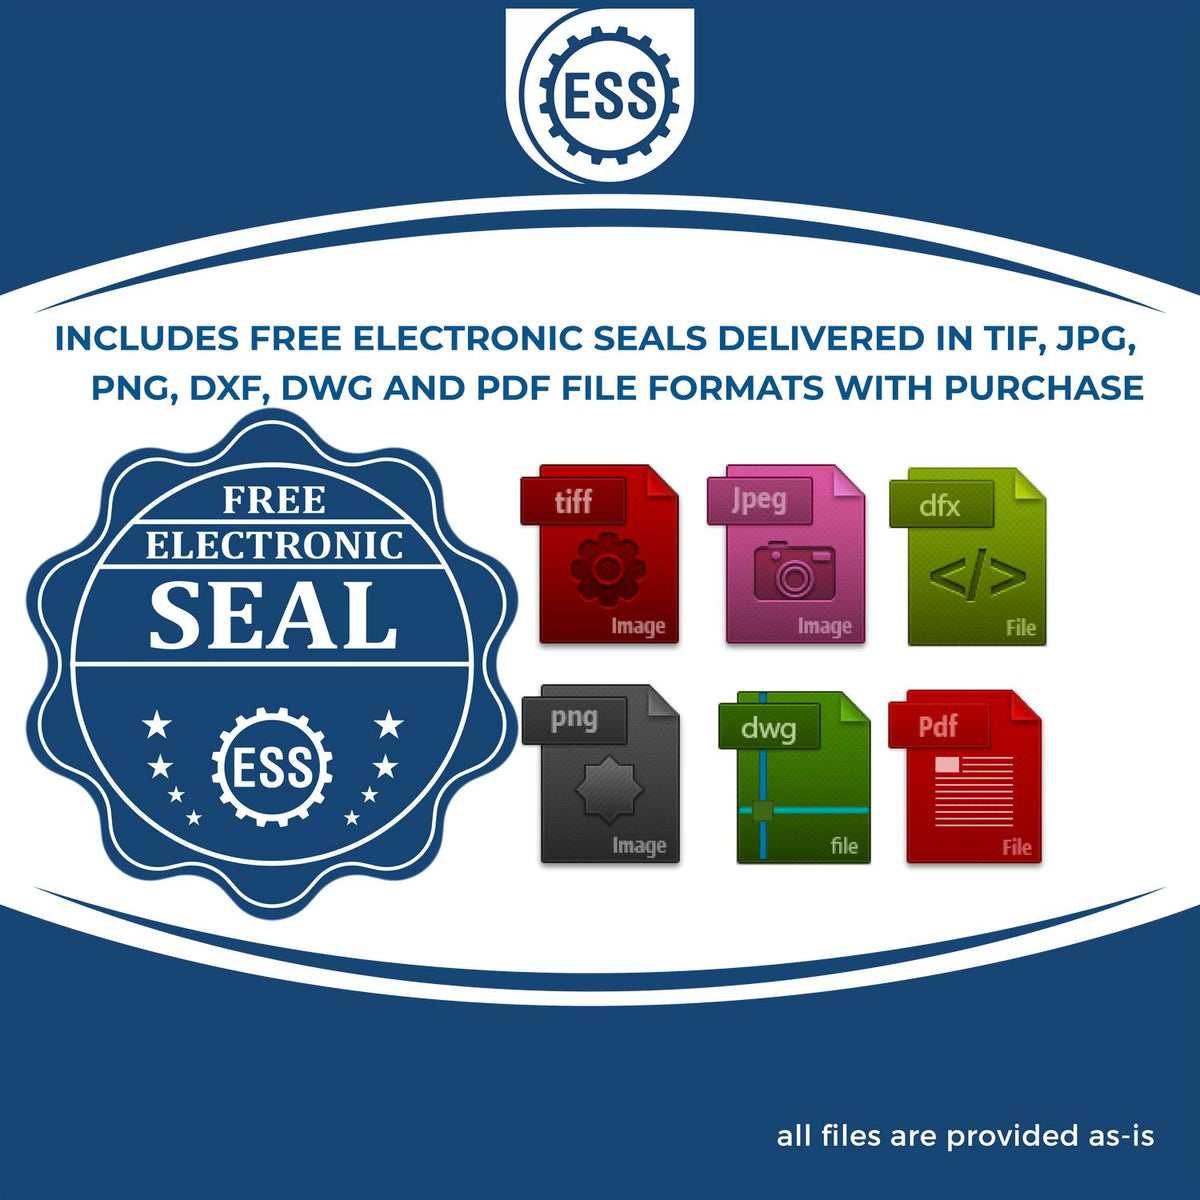 An infographic for the free electronic seal for the Hybrid Mississippi Engineer Seal illustrating the different file type icons such as DXF, DWG, TIF, JPG and PNG.